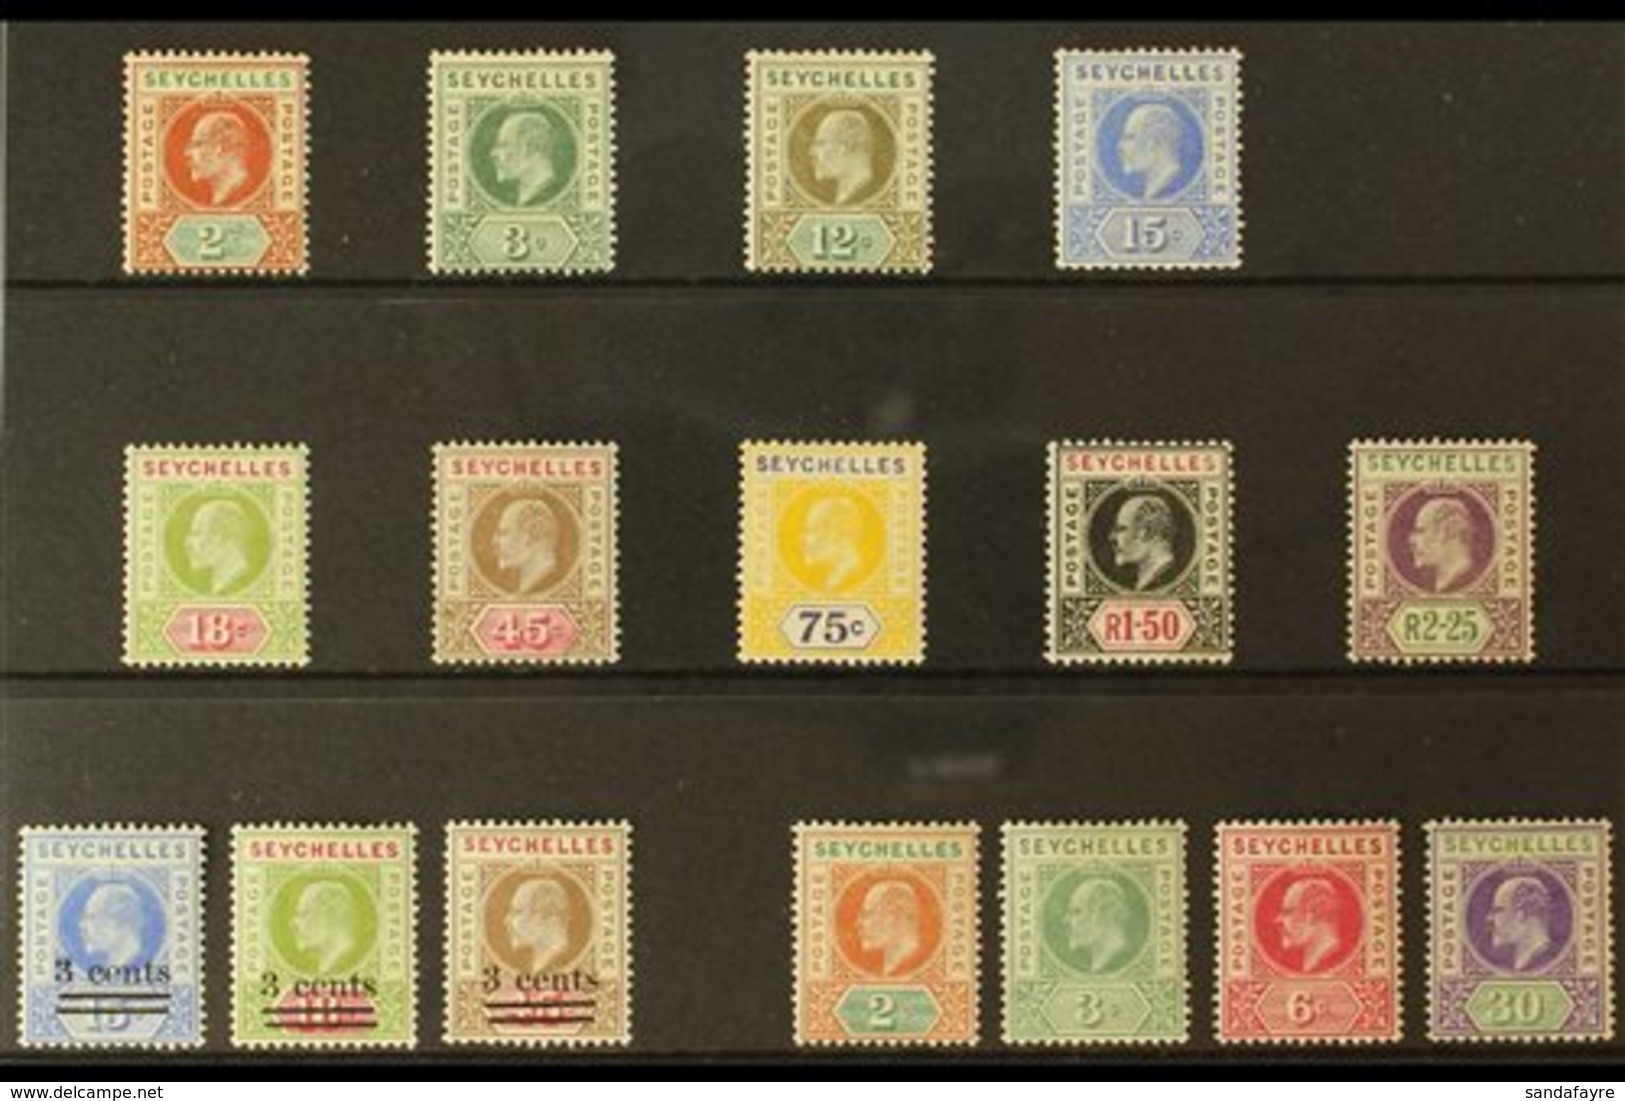 1903-06 KEVII MINT SELECTION Presented On A Stock Card That Includes 1903 CA Wmk Range With Most Values To 2r25, 1903 Su - Seychellen (...-1976)